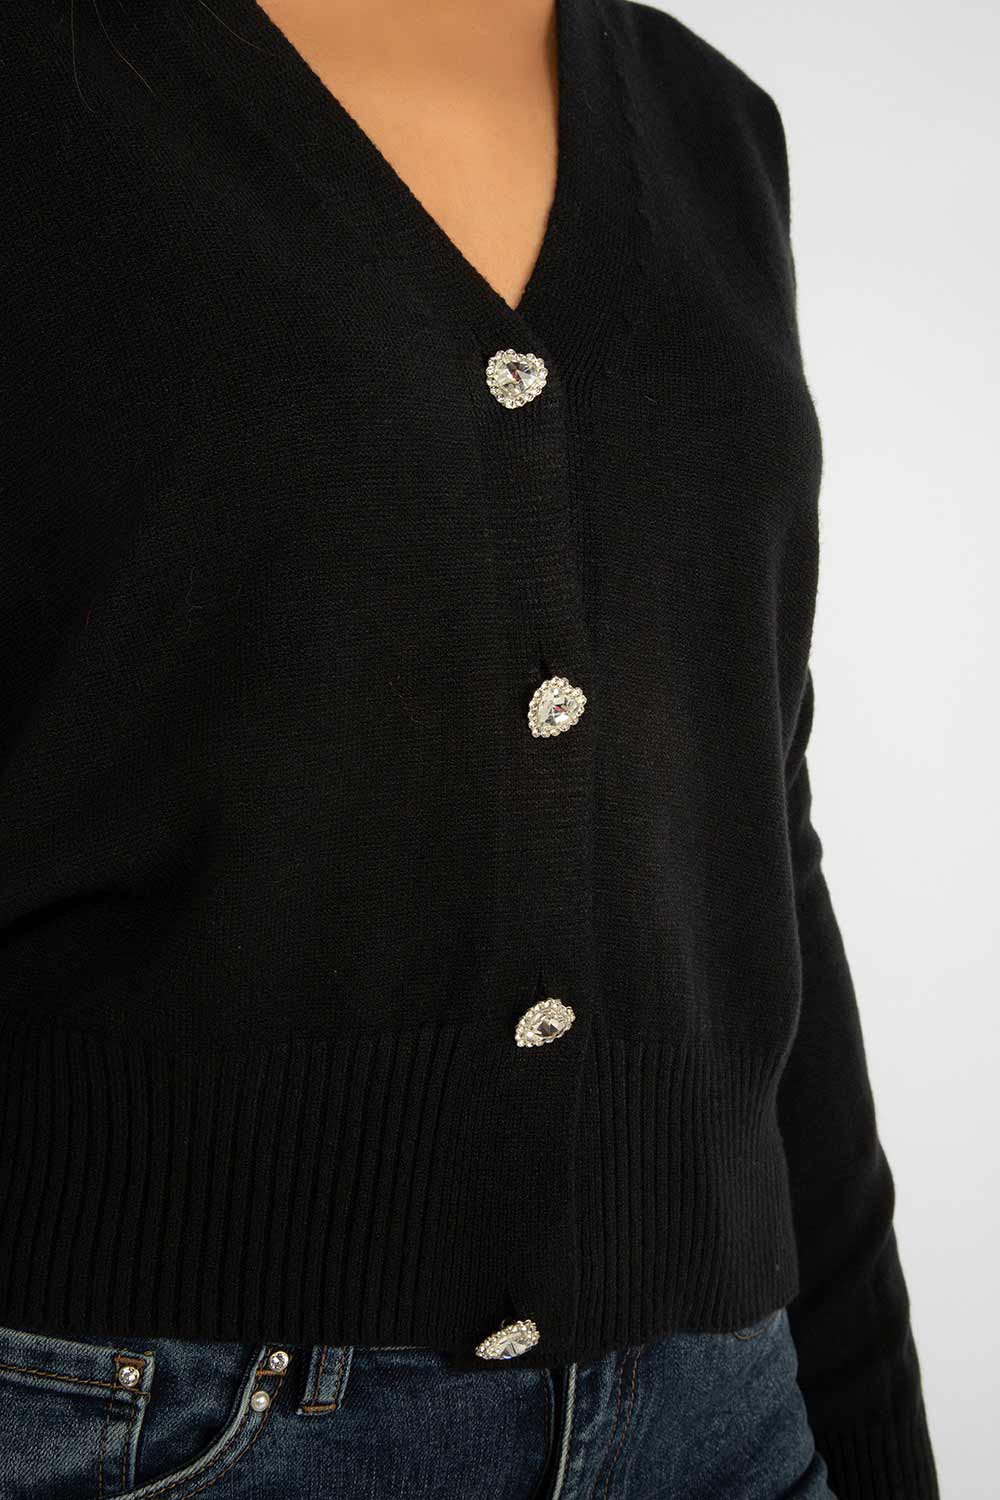 Women's Clothing FEMME FATALE (CEL18CDG) Cardigan with Rhinestone Buttons in BLACK